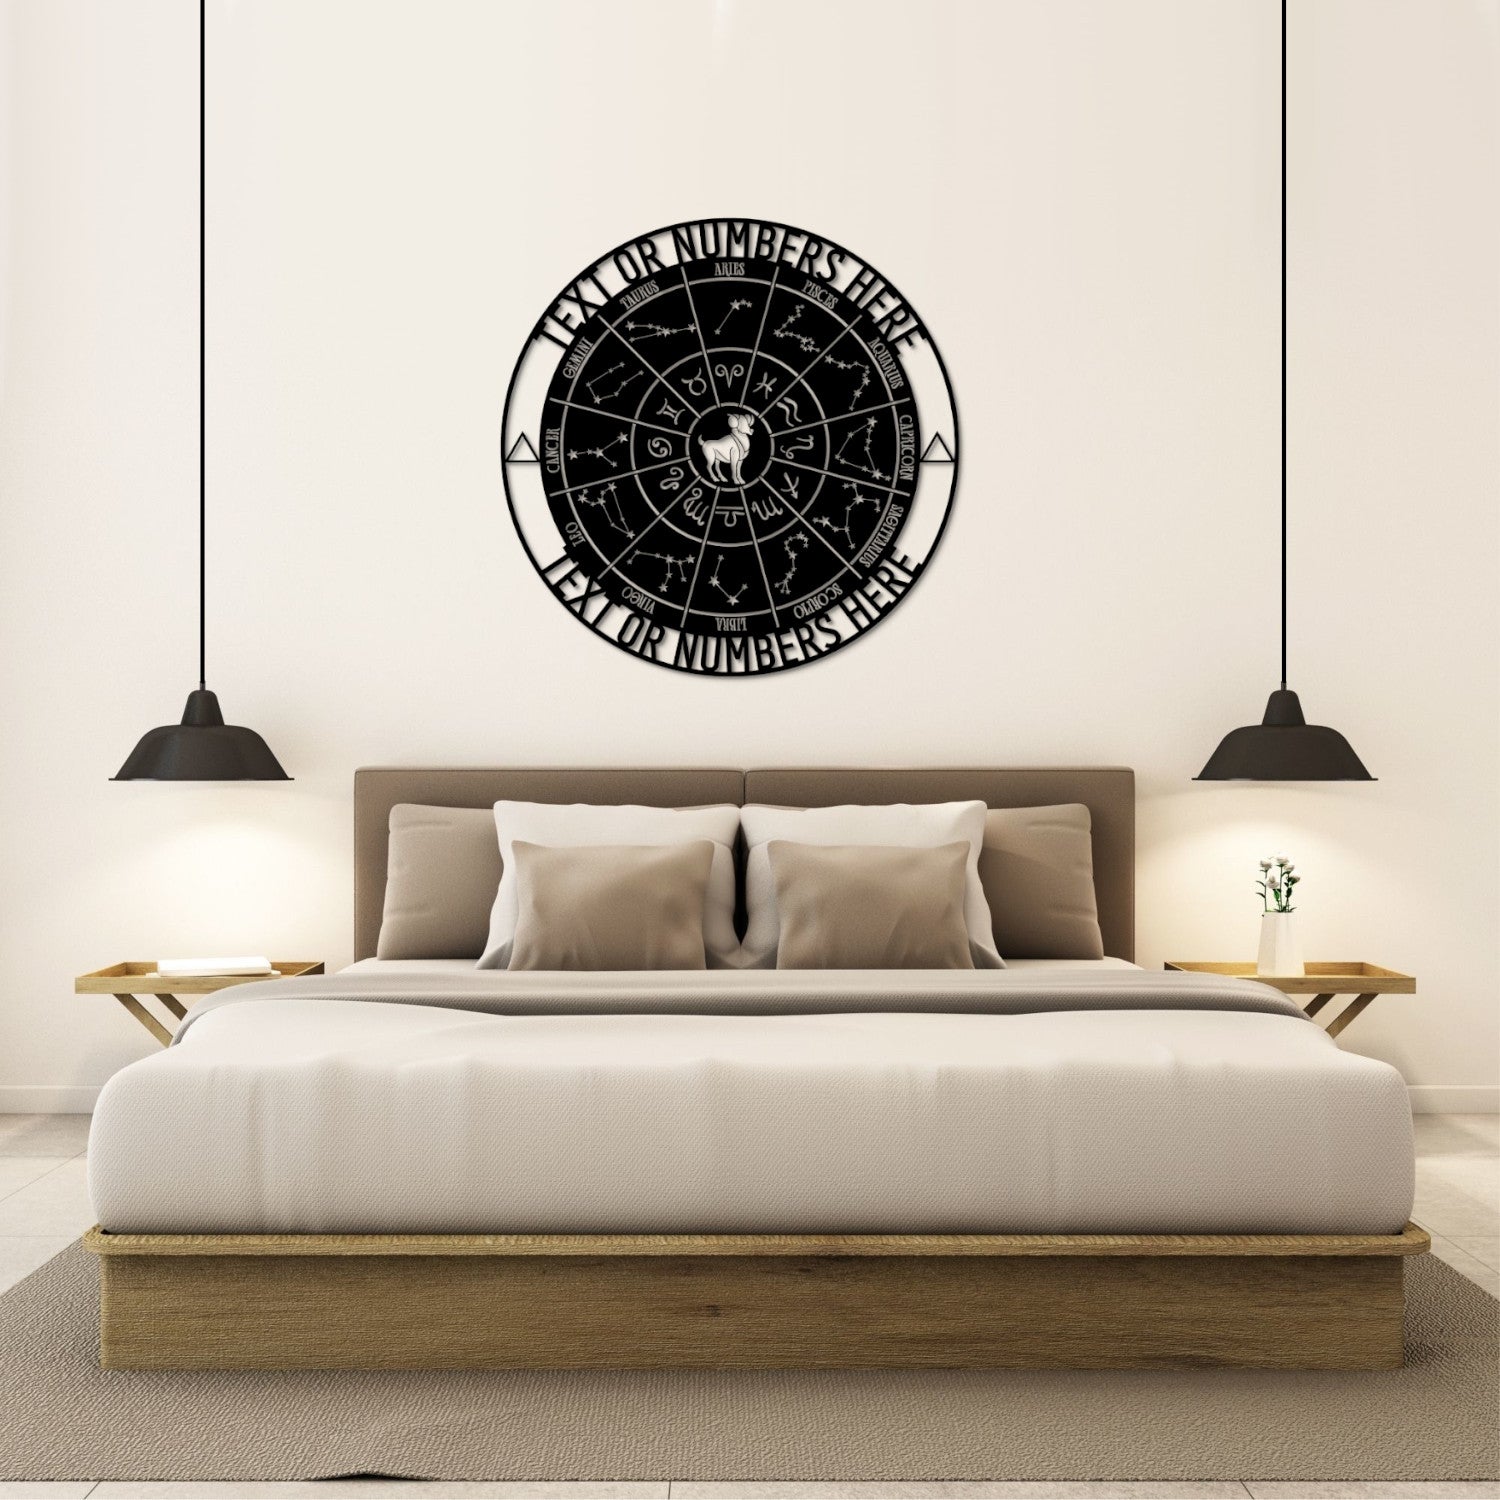 Personalized Aries Zodiac Wheel Name Metal Sign. Custom Astrology Date Wall Decor. Celestial Gifts. Decorative Aries Star Sign Wall Hanging